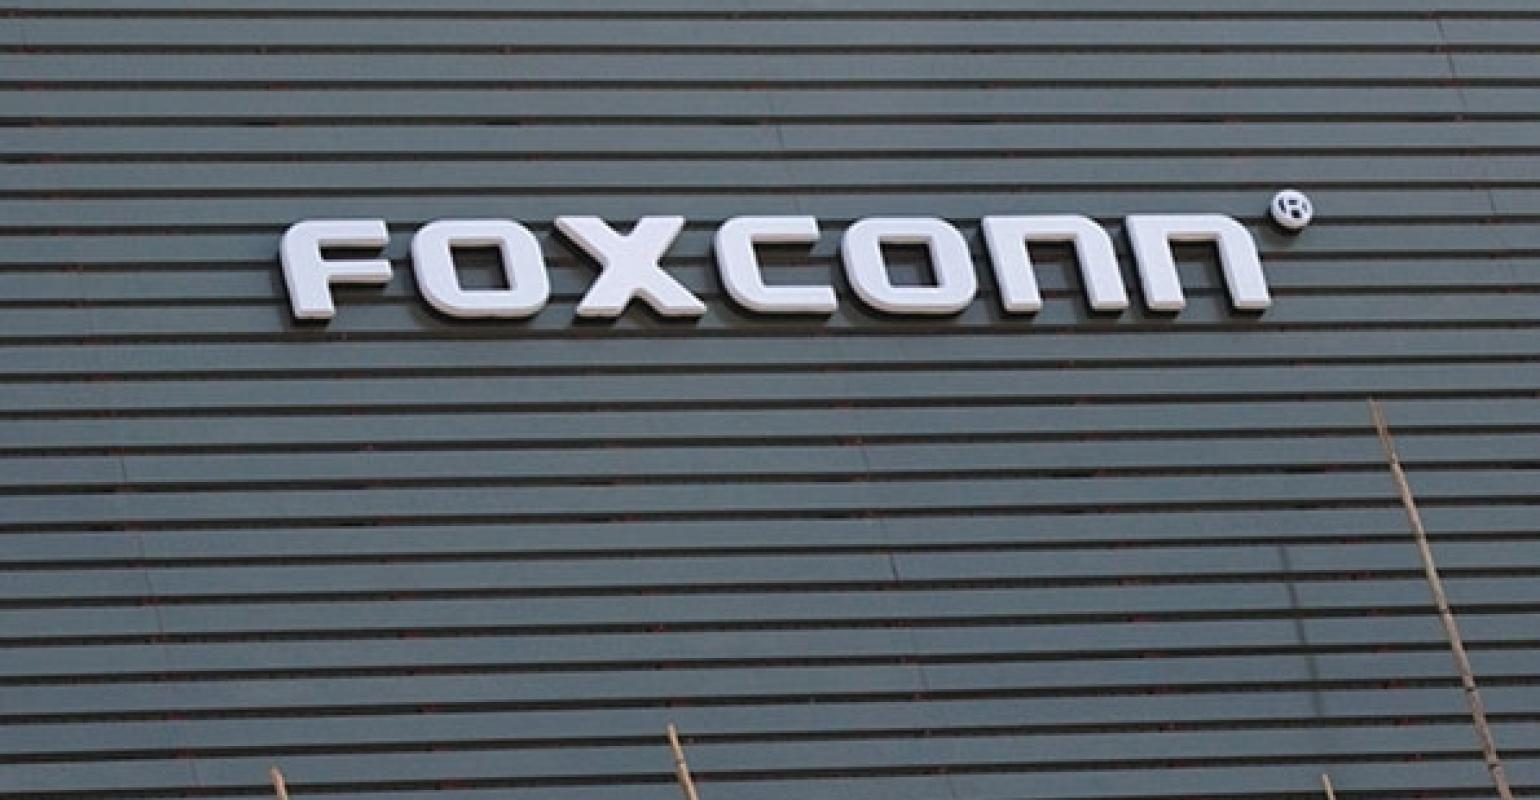 Foxconn Logo - Foxconn Manager Steals Apple iPhonesin China | Intellectual Property ...